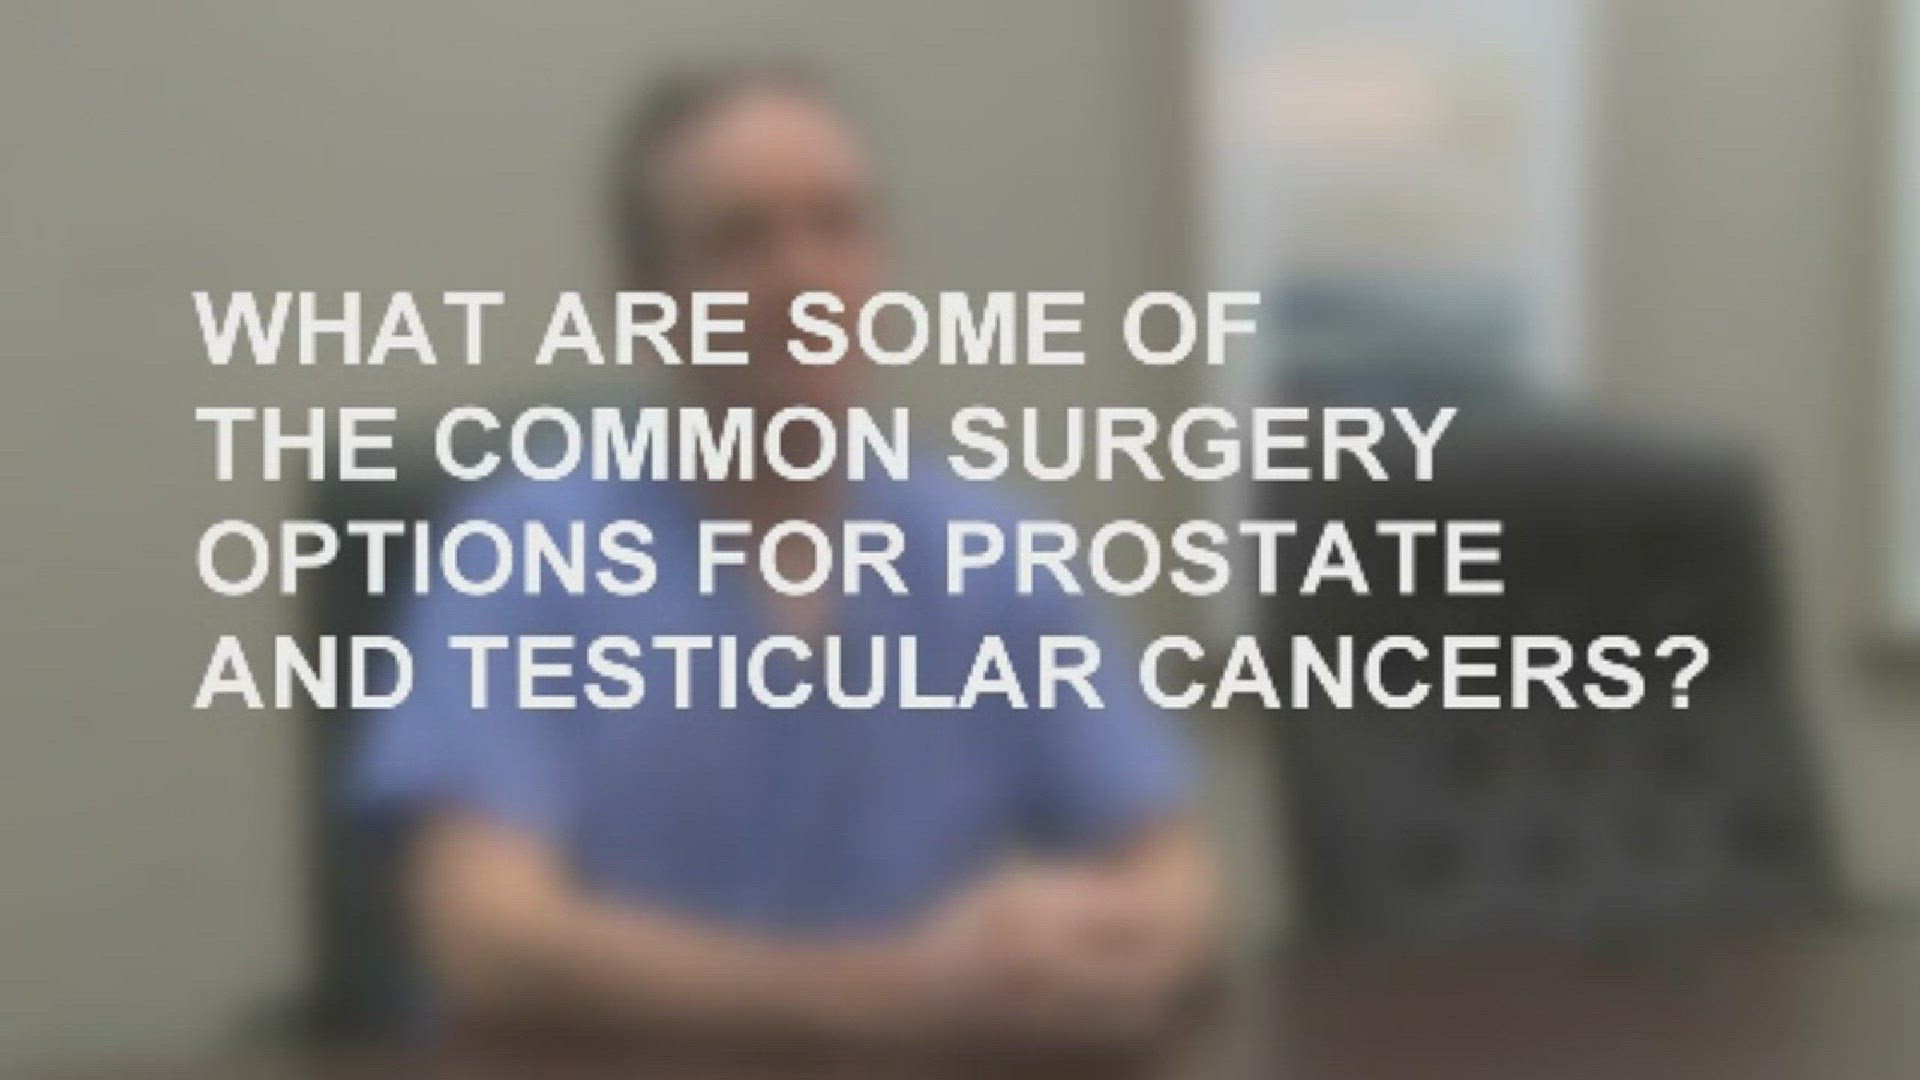 How we treat prostate and testicular cancers